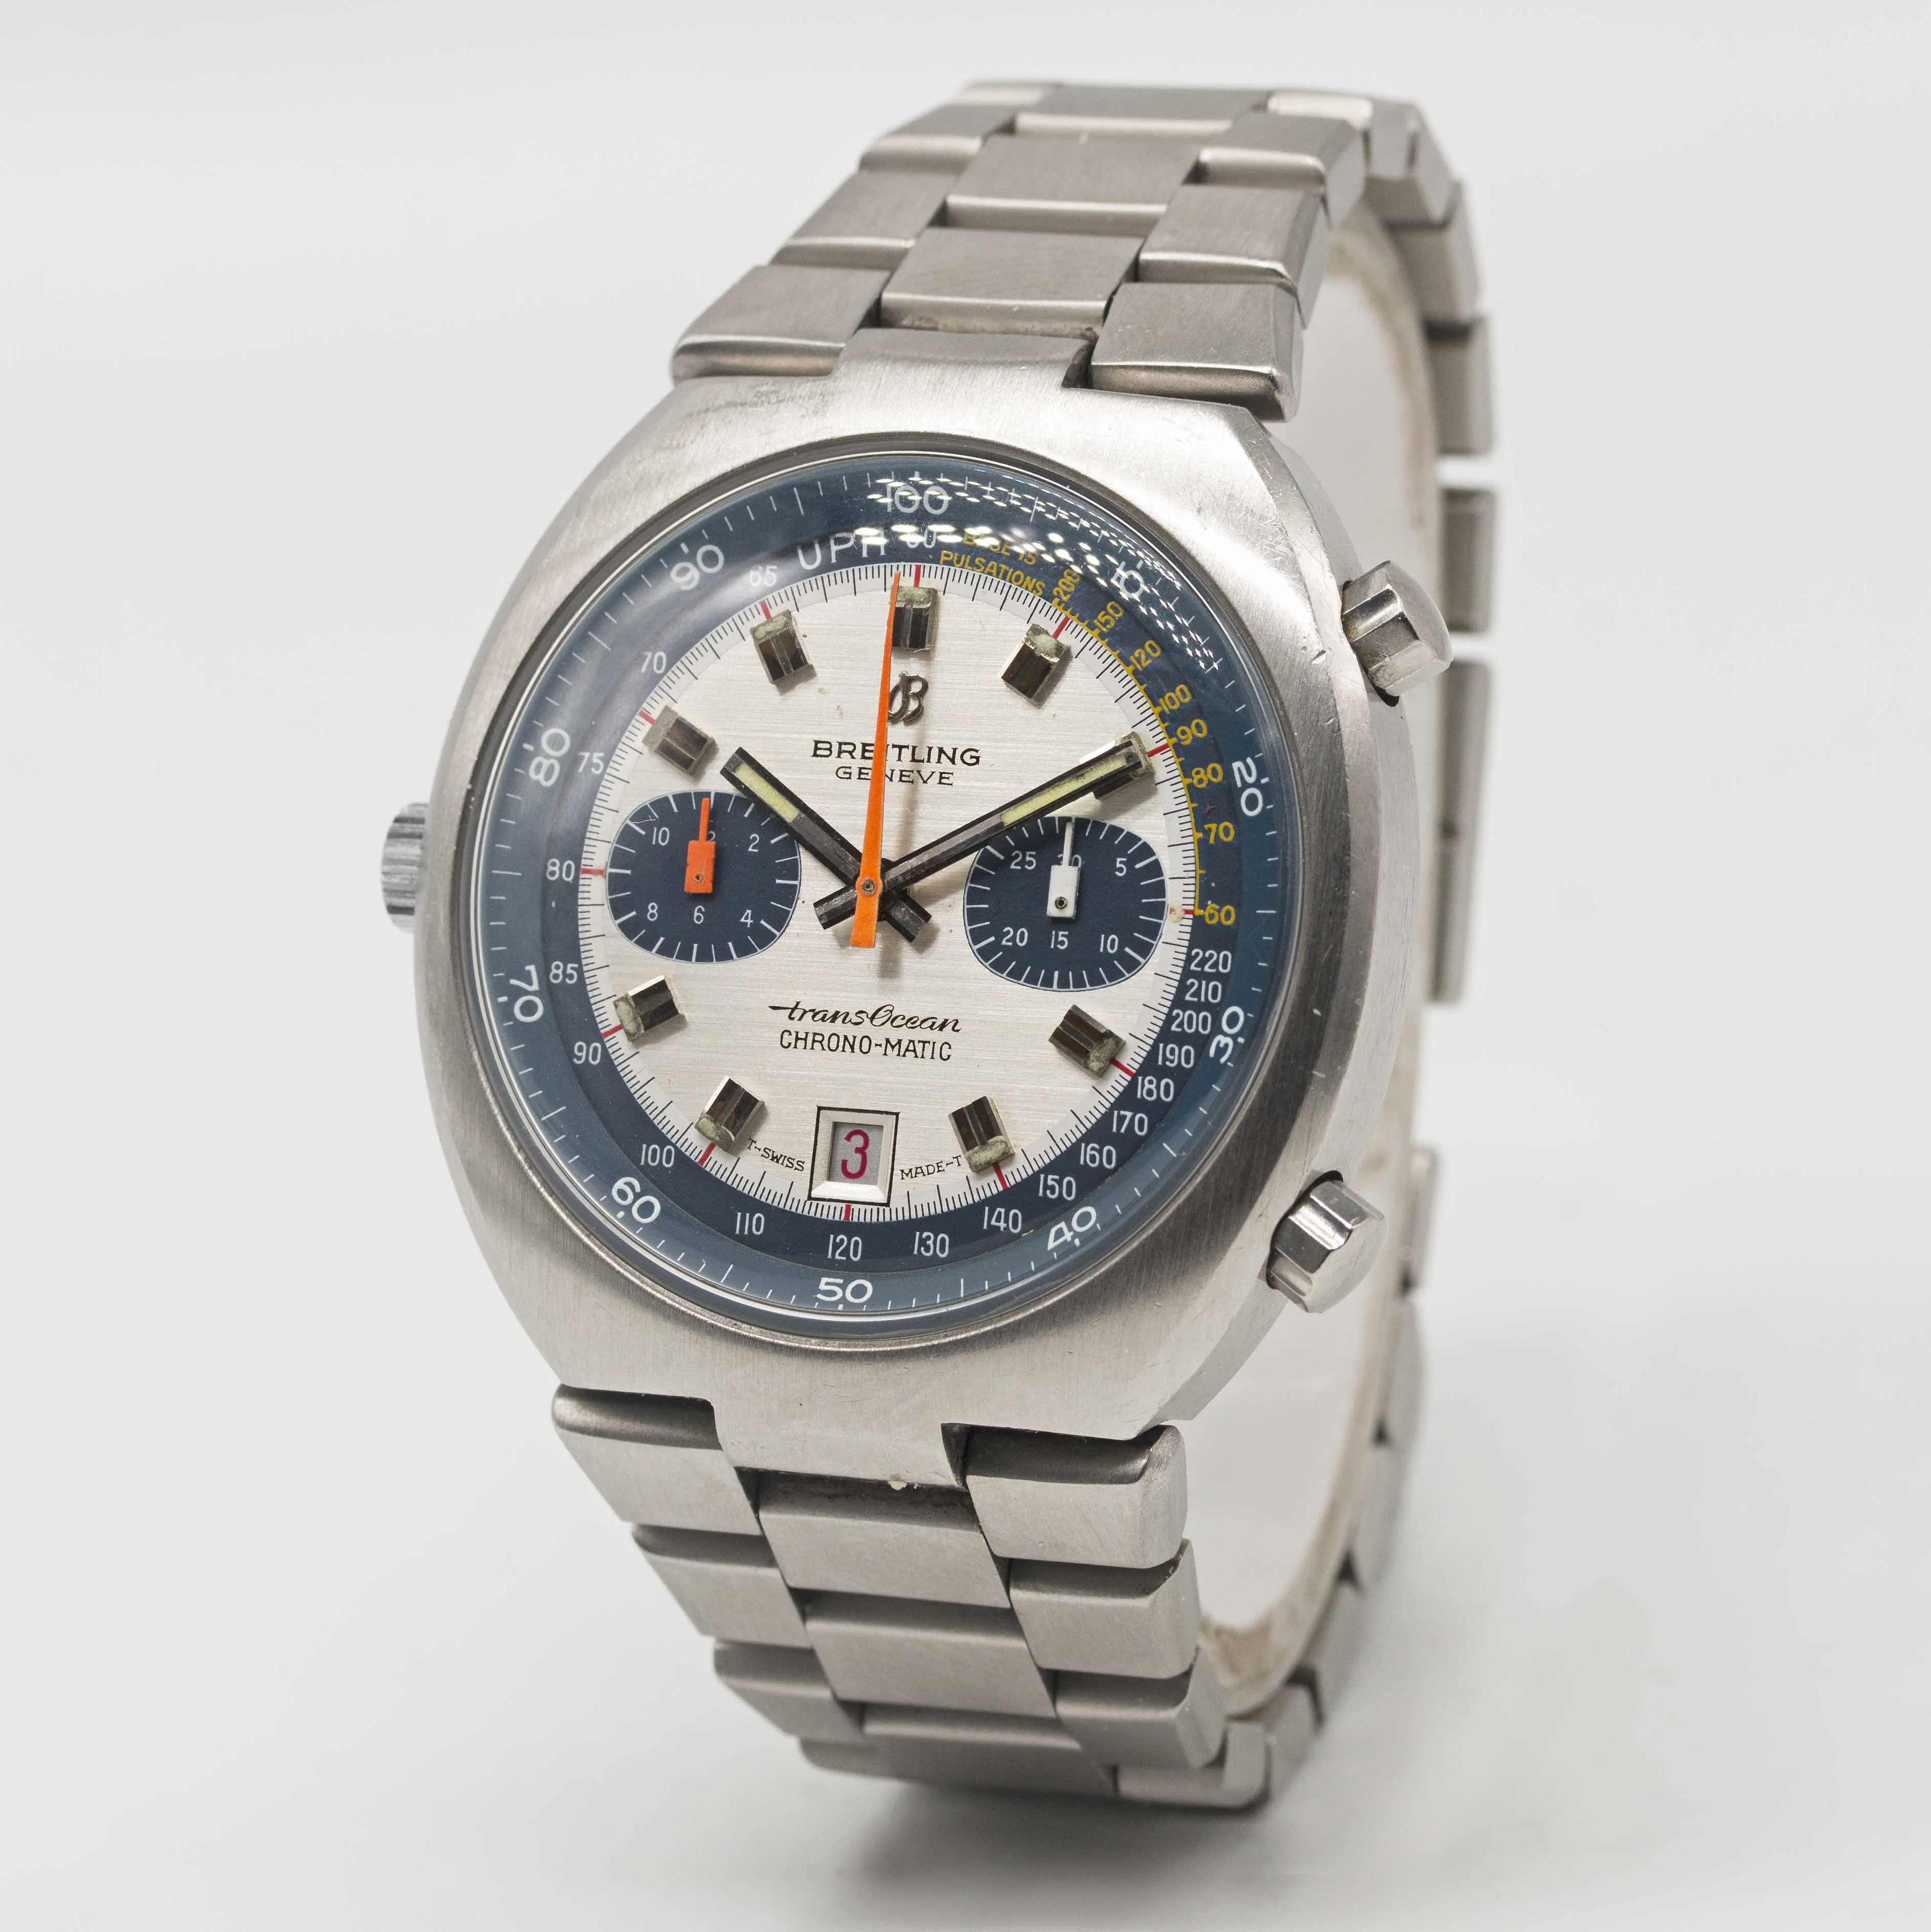 Breitling Chrono-Matic 2119 42mm Stainless steel Silver 2